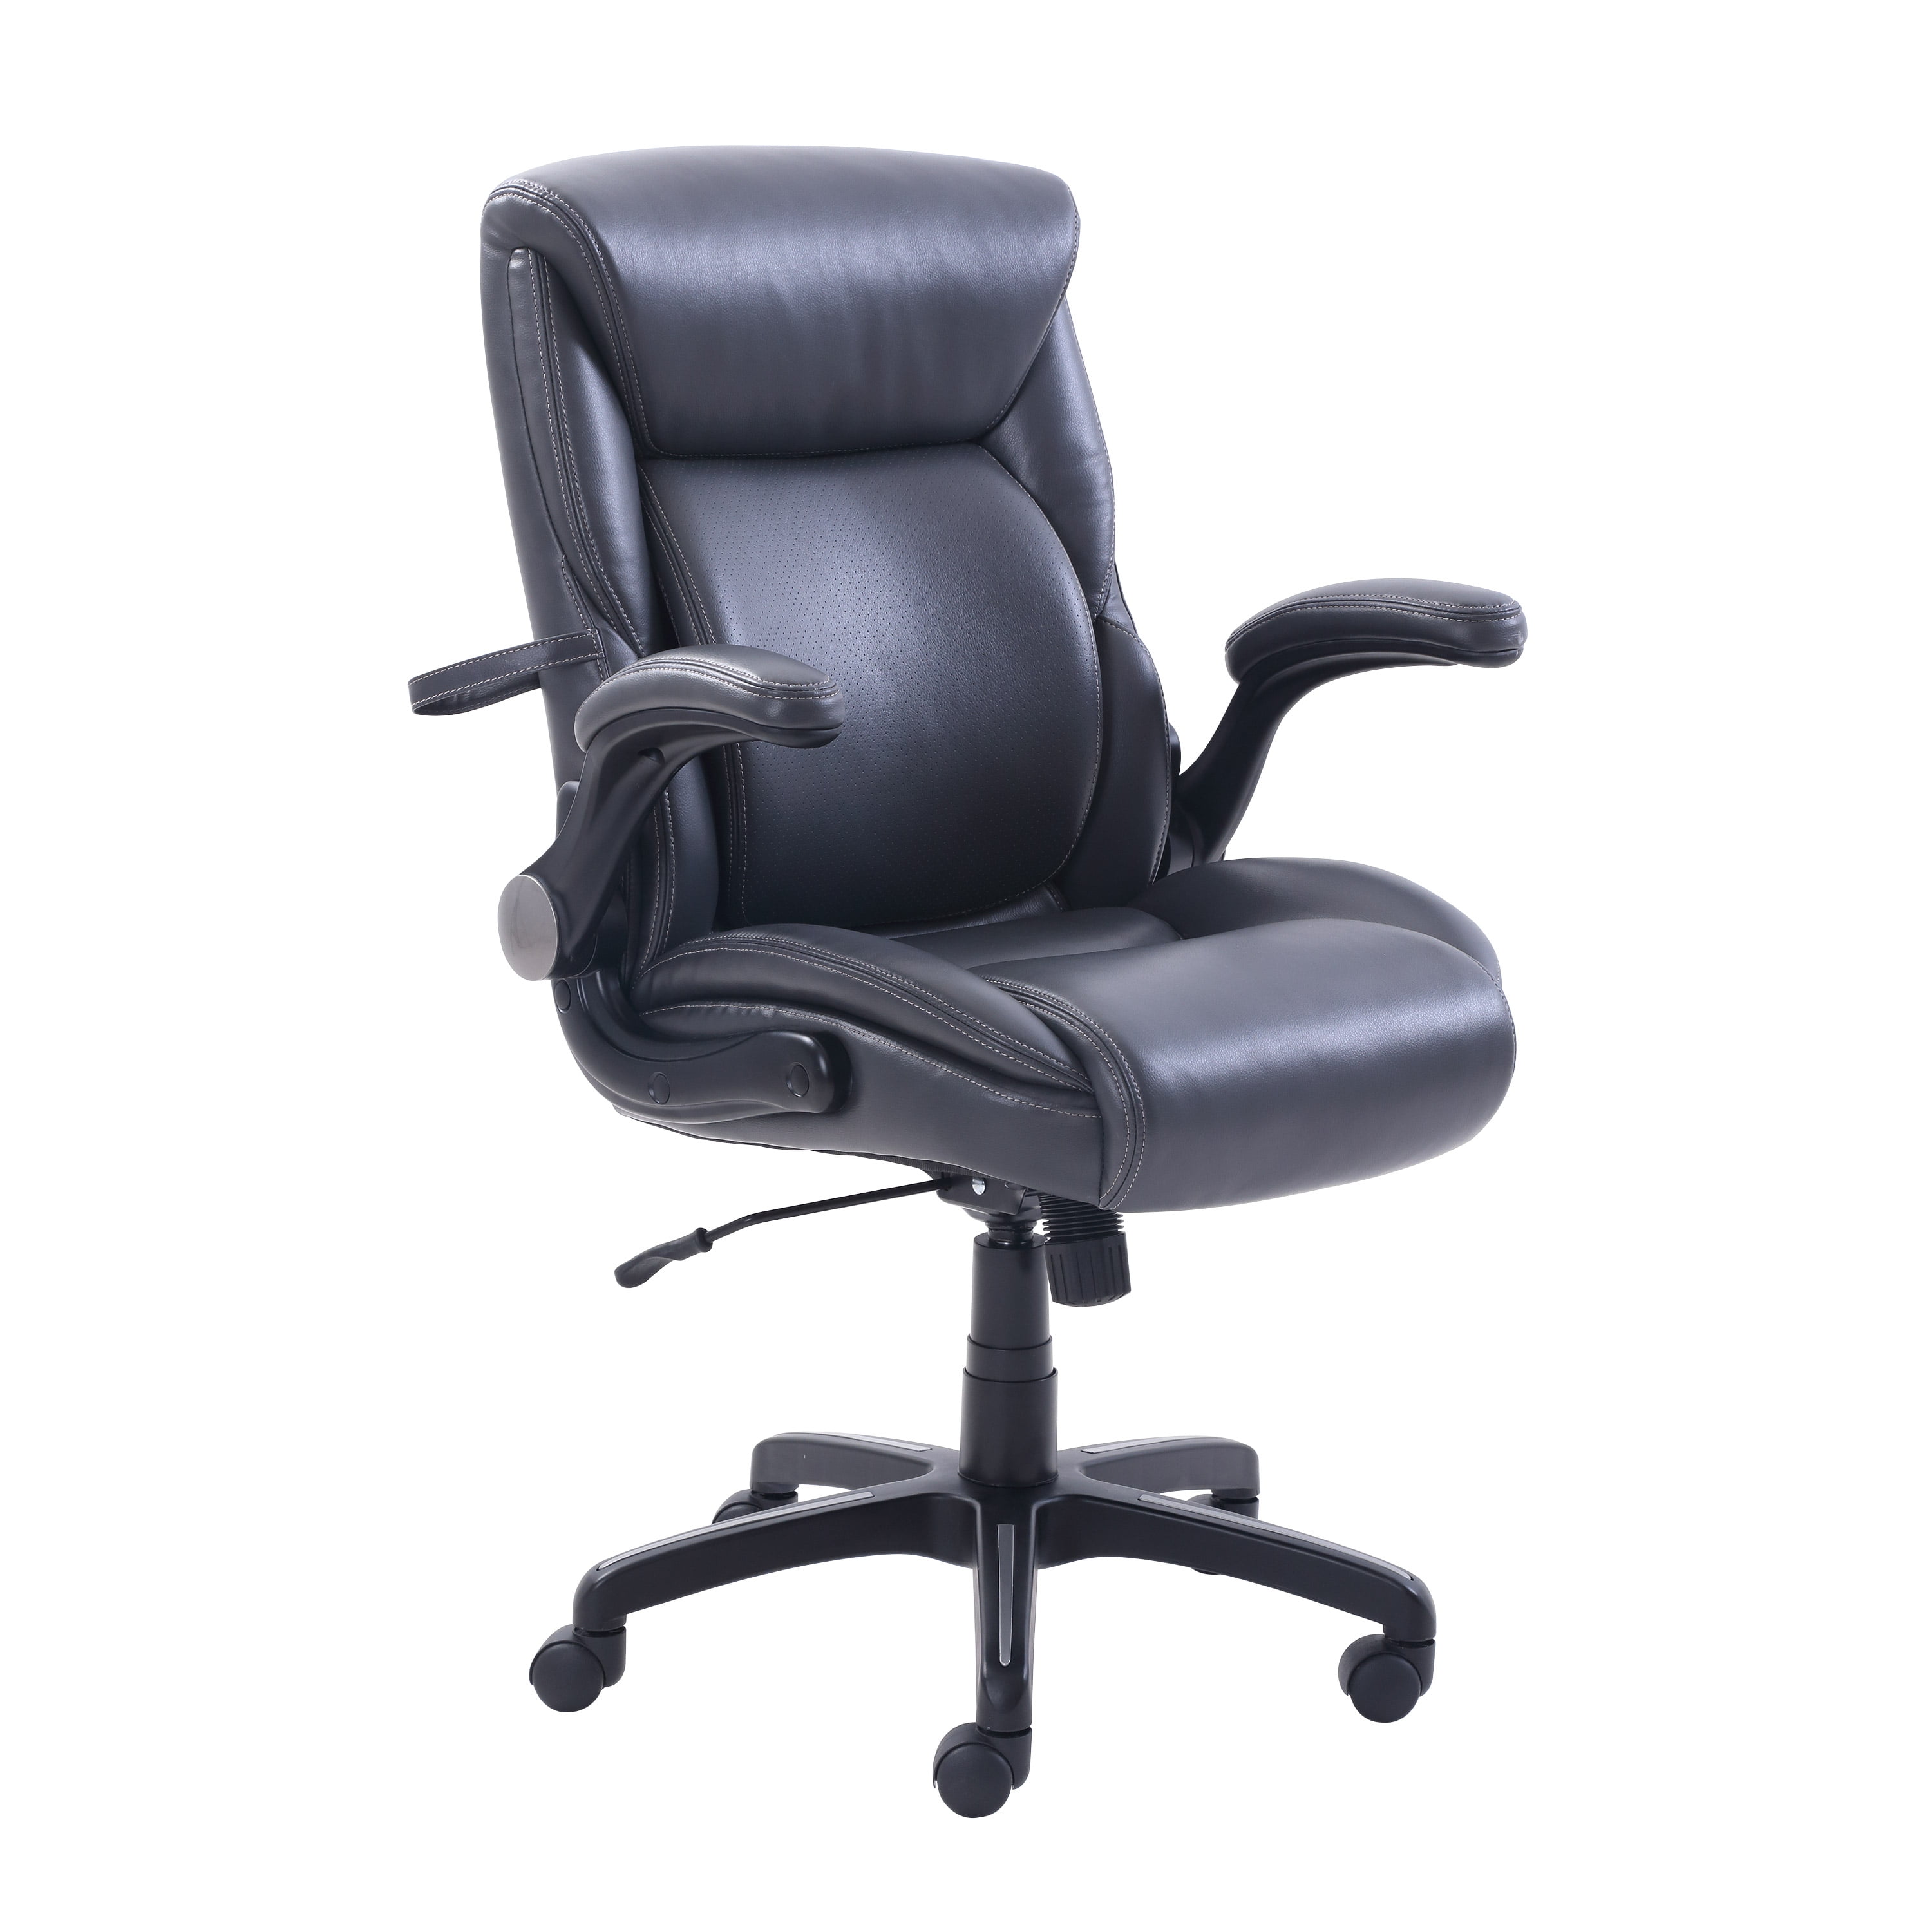 Serta Air Lumbar Bonded Leather Manager Office Chair, Gray